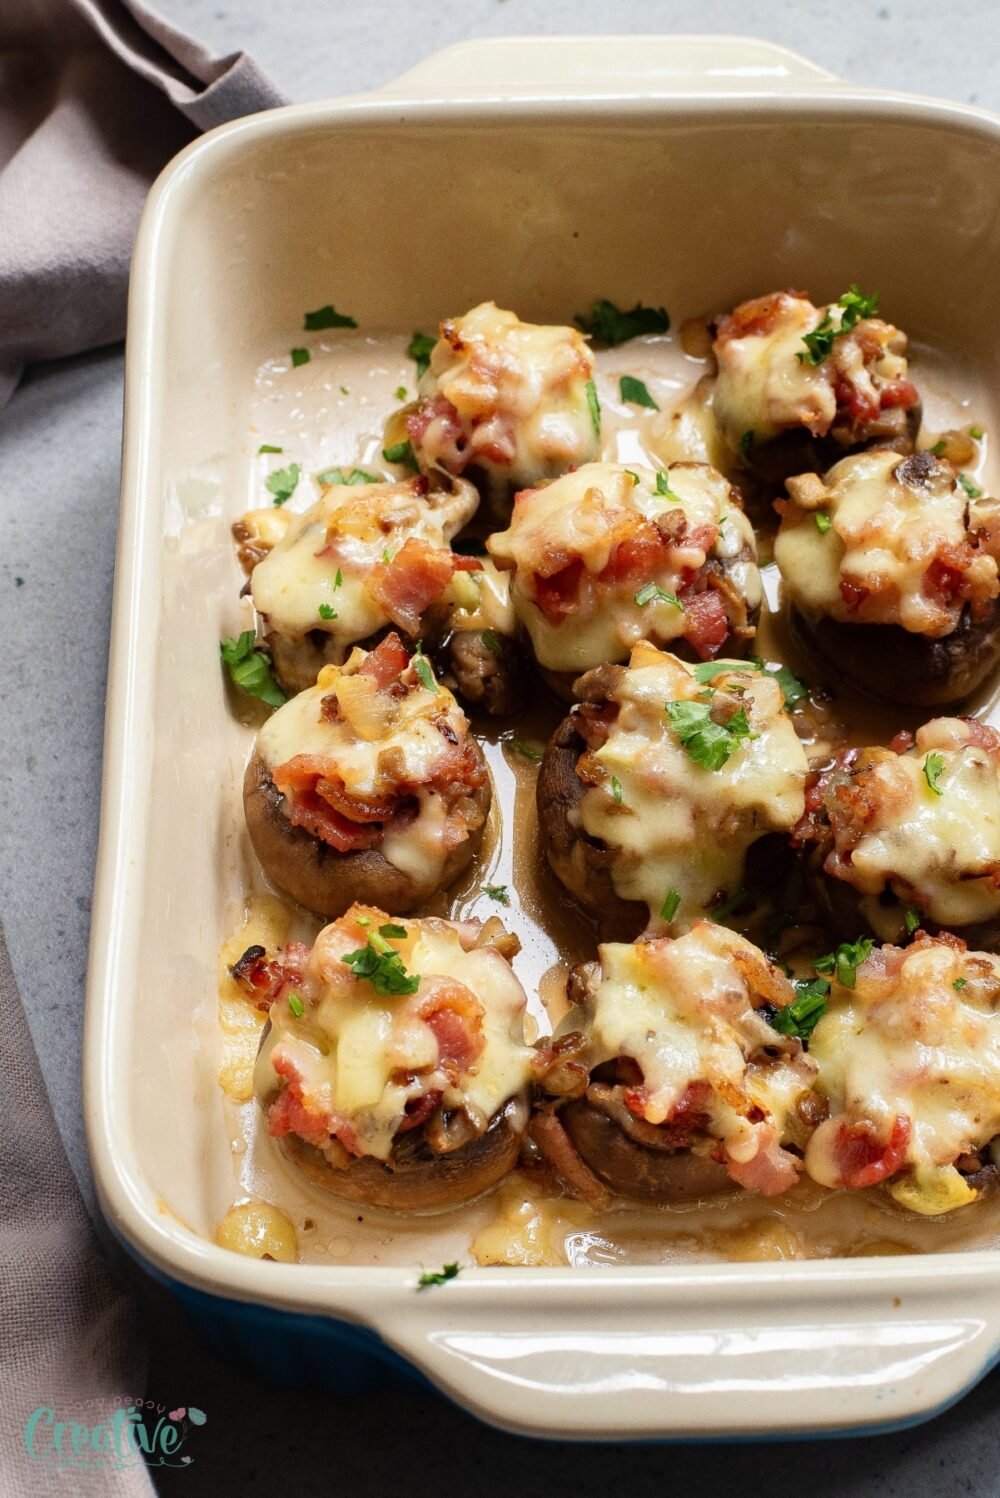 Delicious bacon cheese stuffed mushrooms: a crowd-pleasing appetizer with savory bacon, gooey cheese, and earthy mushrooms.